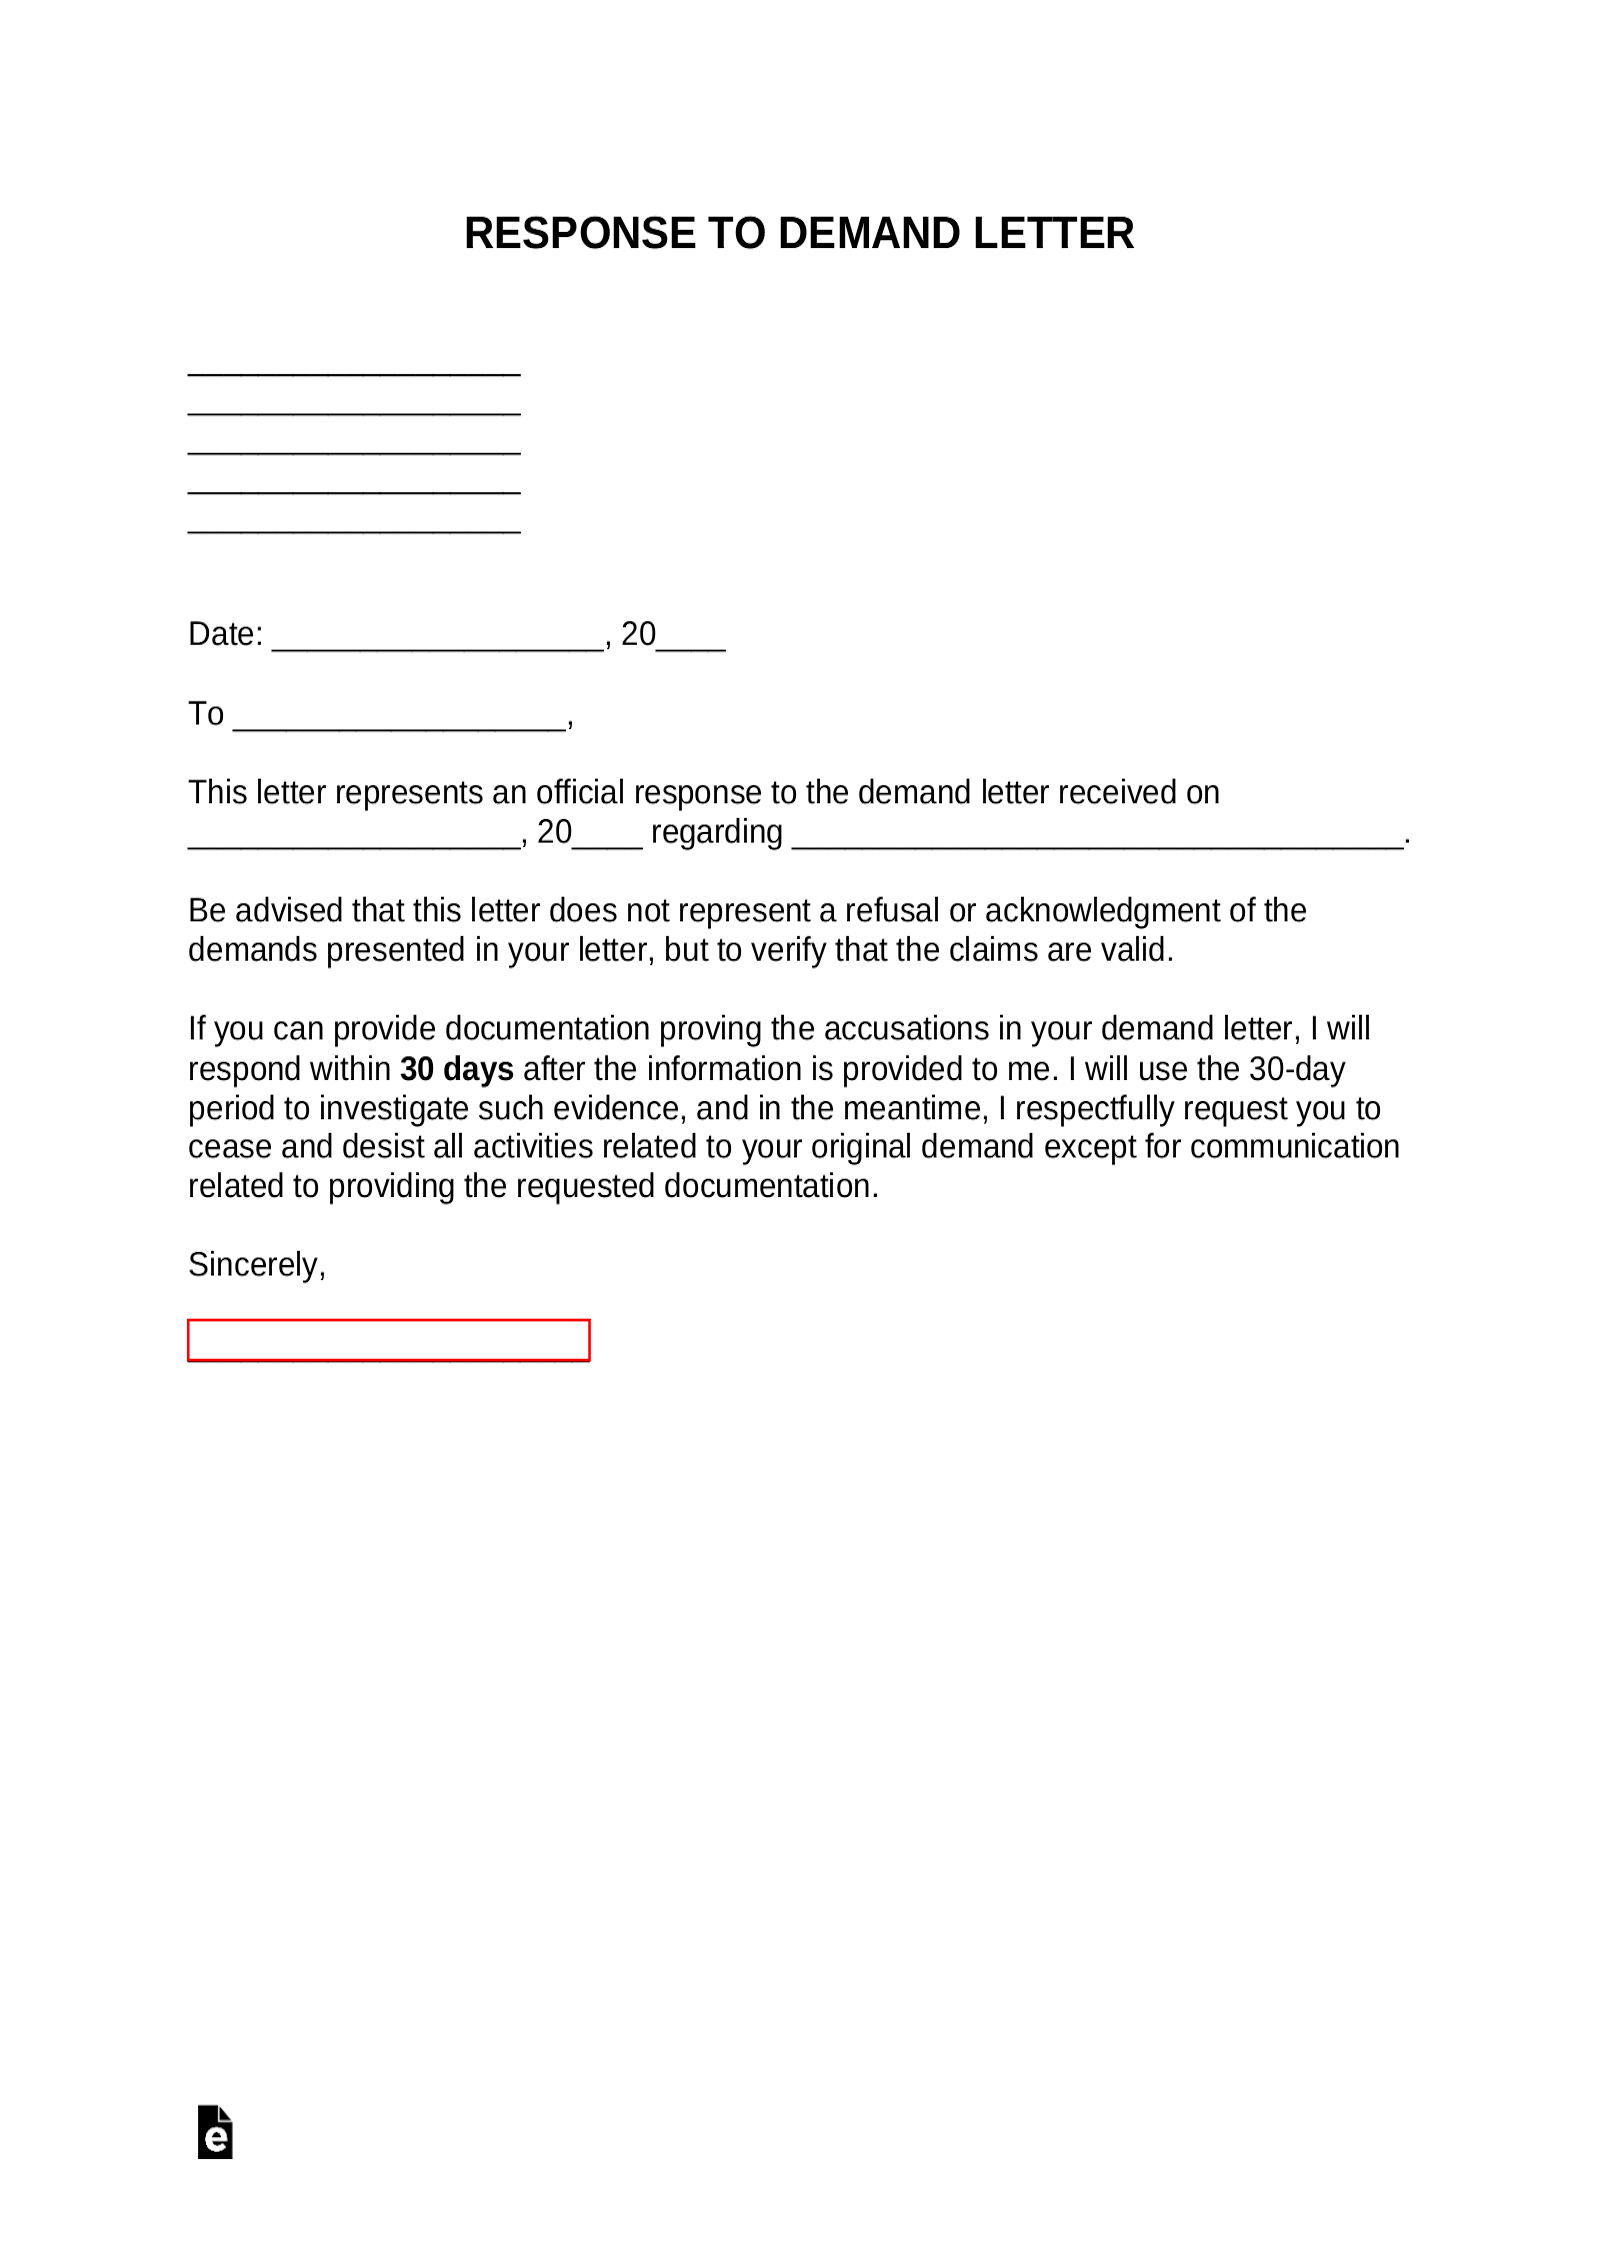 Response To Demand Letter Template